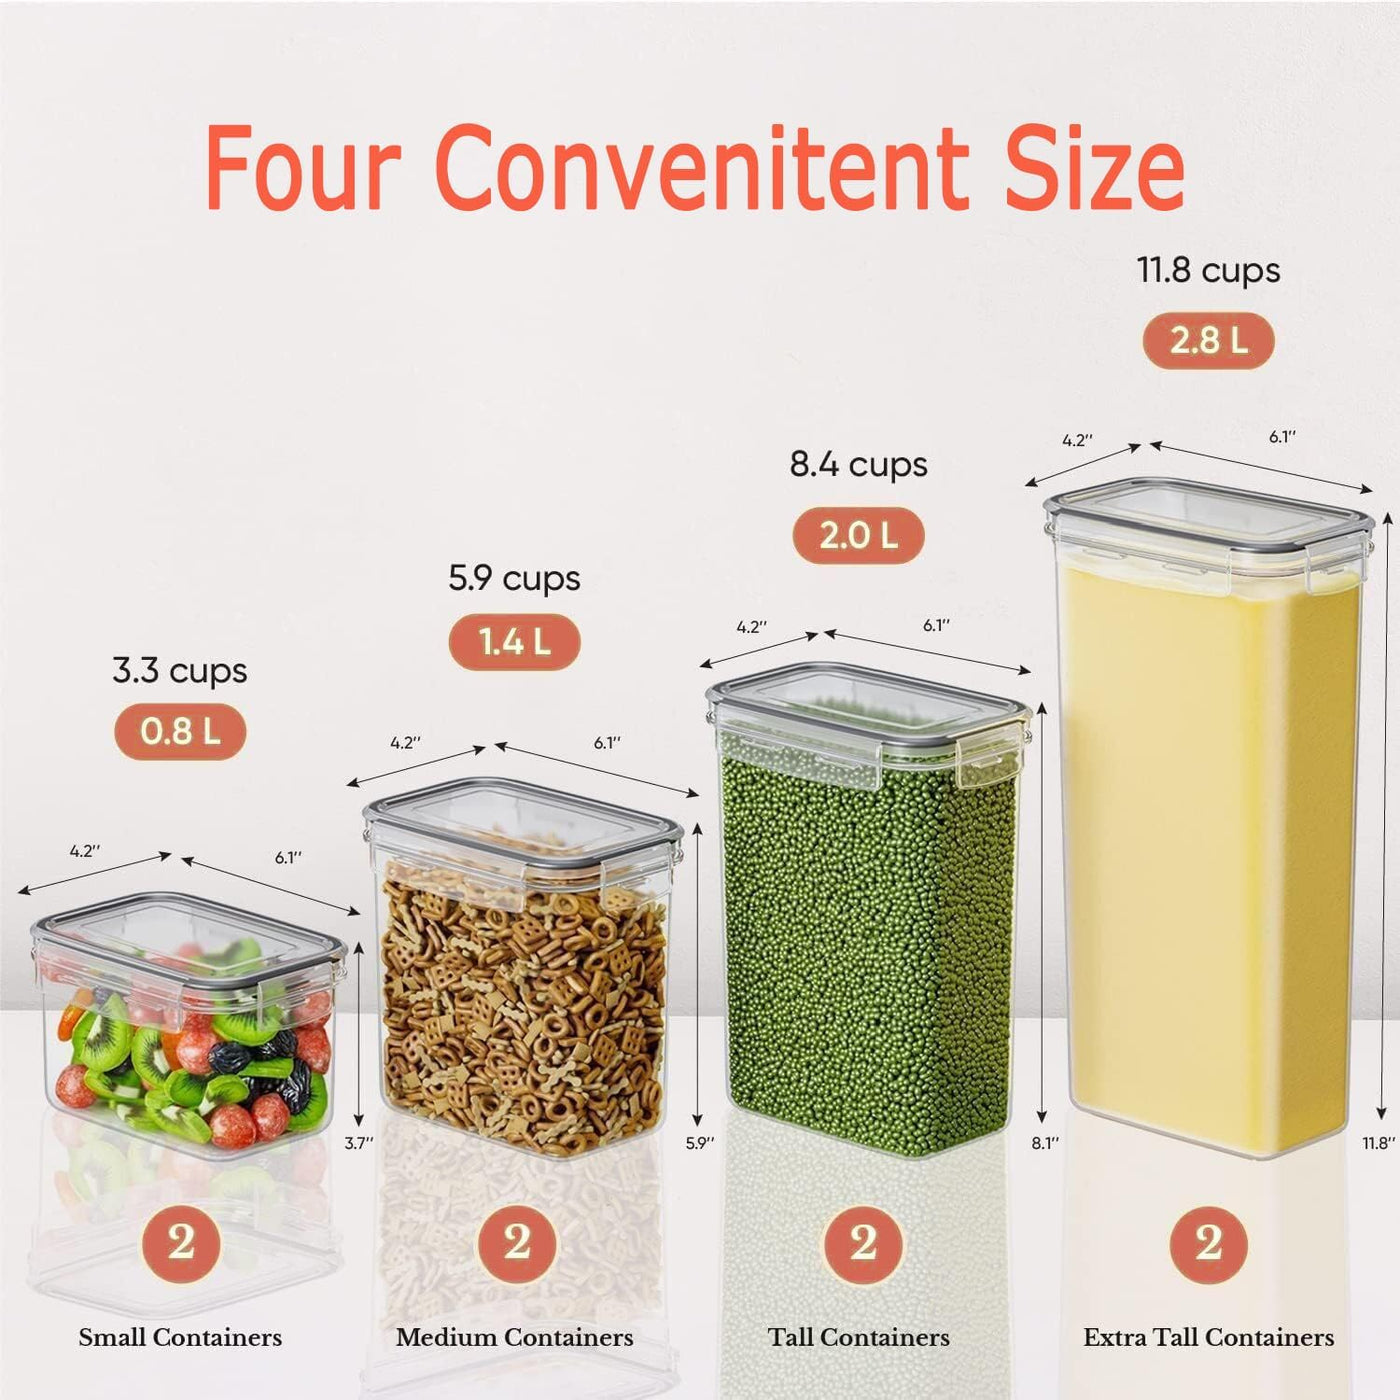 Airtight Food Storage Container Set of 8, Pantry Organization Containers, Plastic Kitchen Storage Canister Sets with Lids, Stackable Food Container Sets for Cereal, Flour, Snack - Clear (Set of 8)